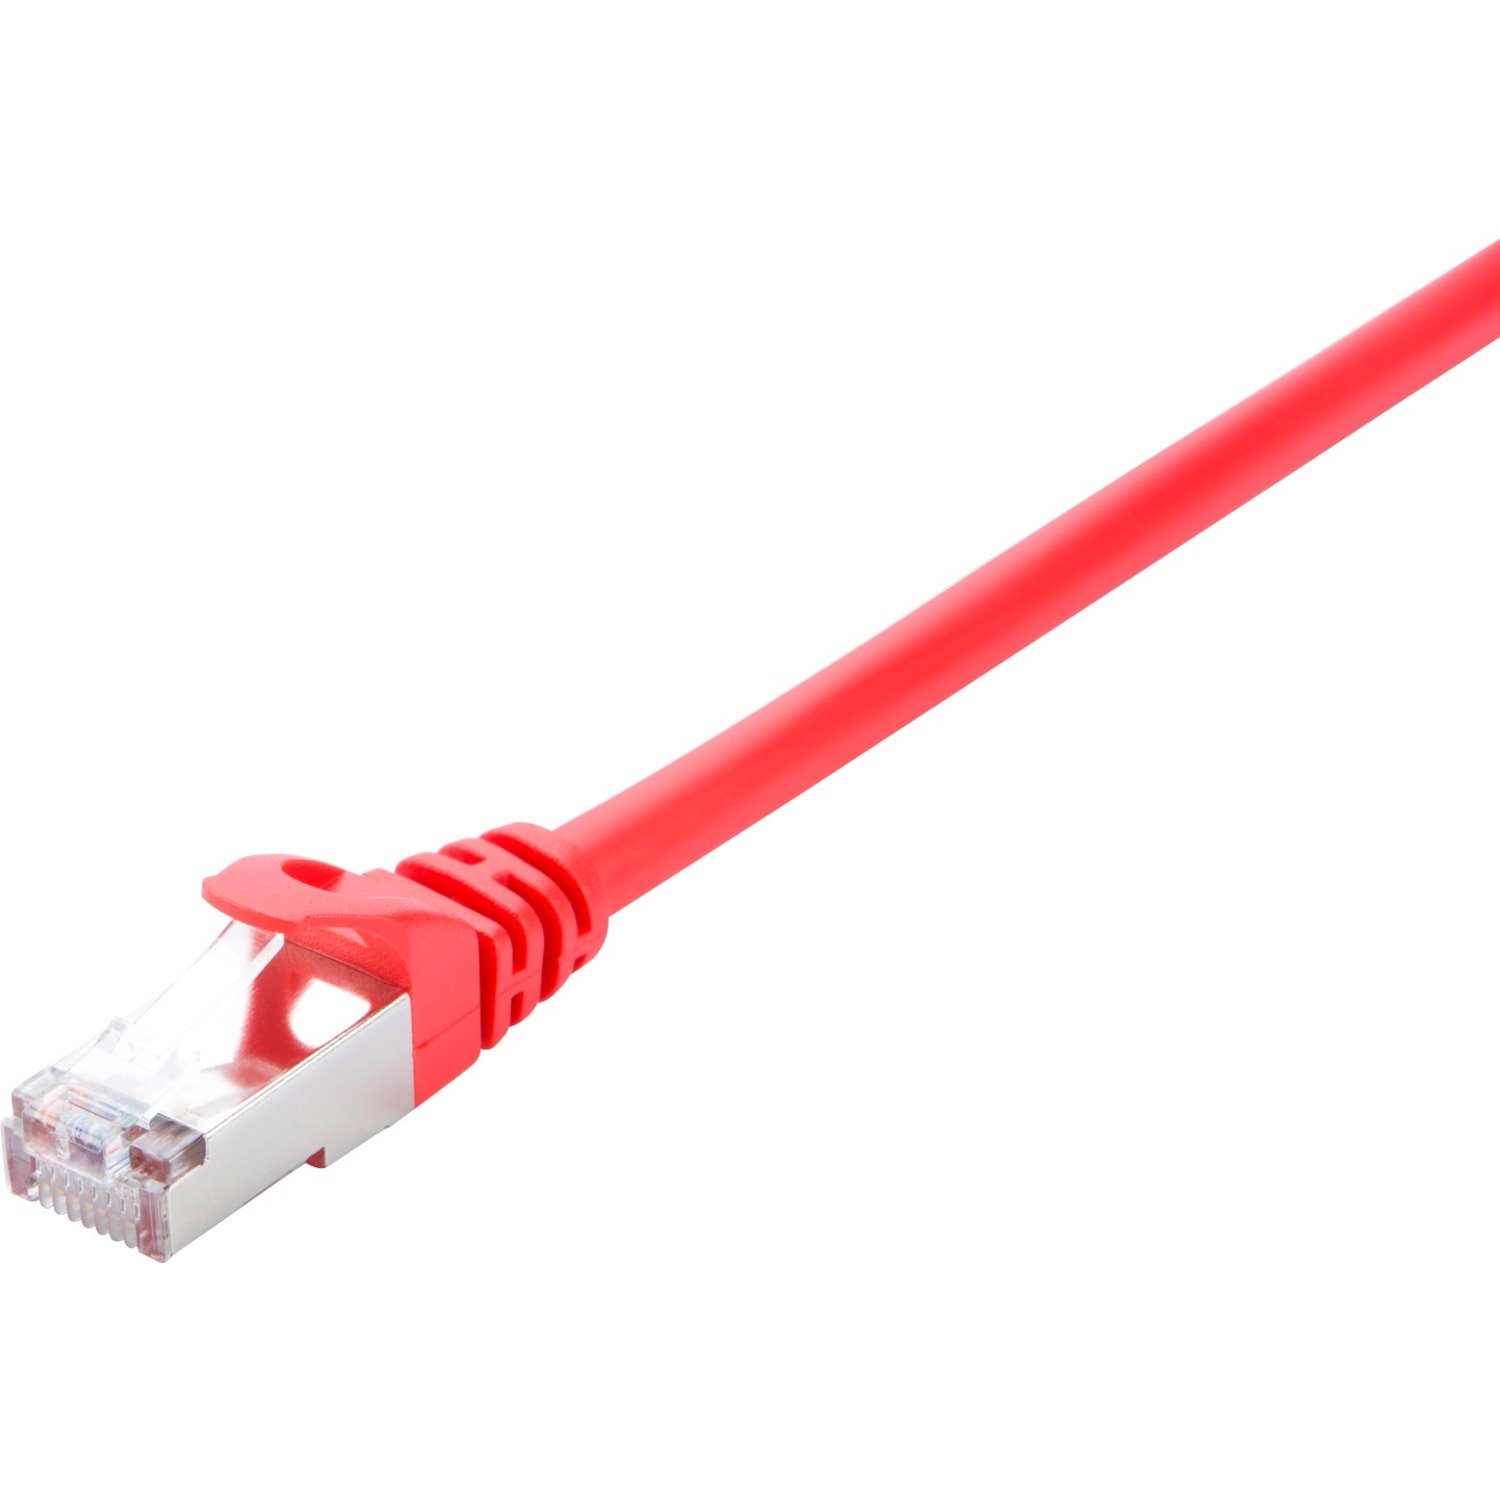 V7 Red Cat6 Shielded (STP) Cable RJ45 Male to RJ45 Male 5m 16.4ft